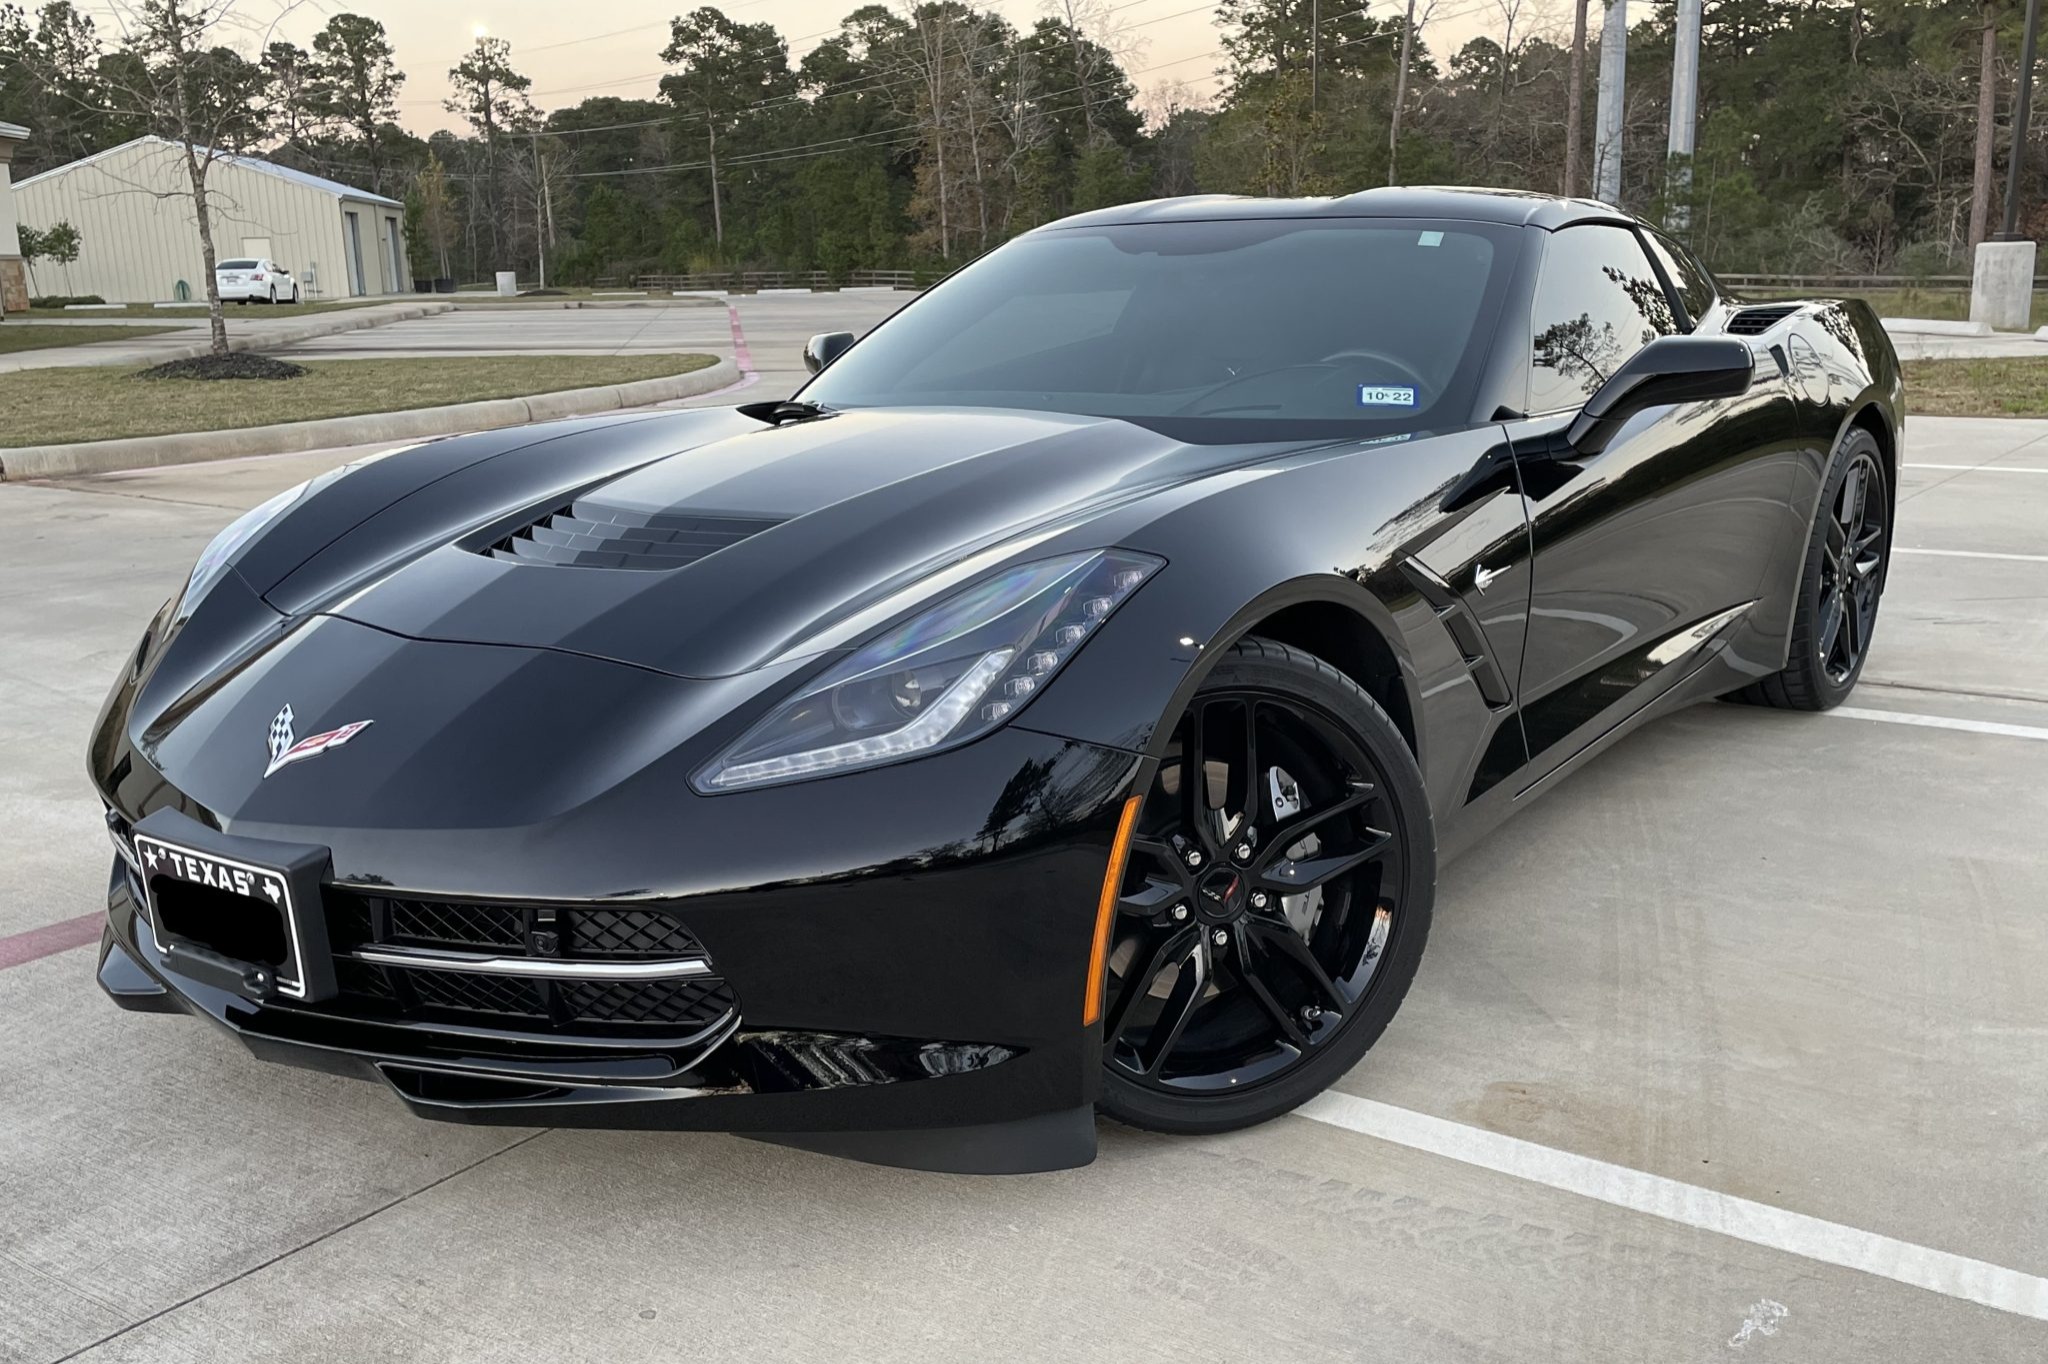 2019 Chevrolet Corvette Stingray 2LT Coupe for sale on BaT Auctions -  closed on February 3, 2022 (Lot #64,921) | Bring a Trailer